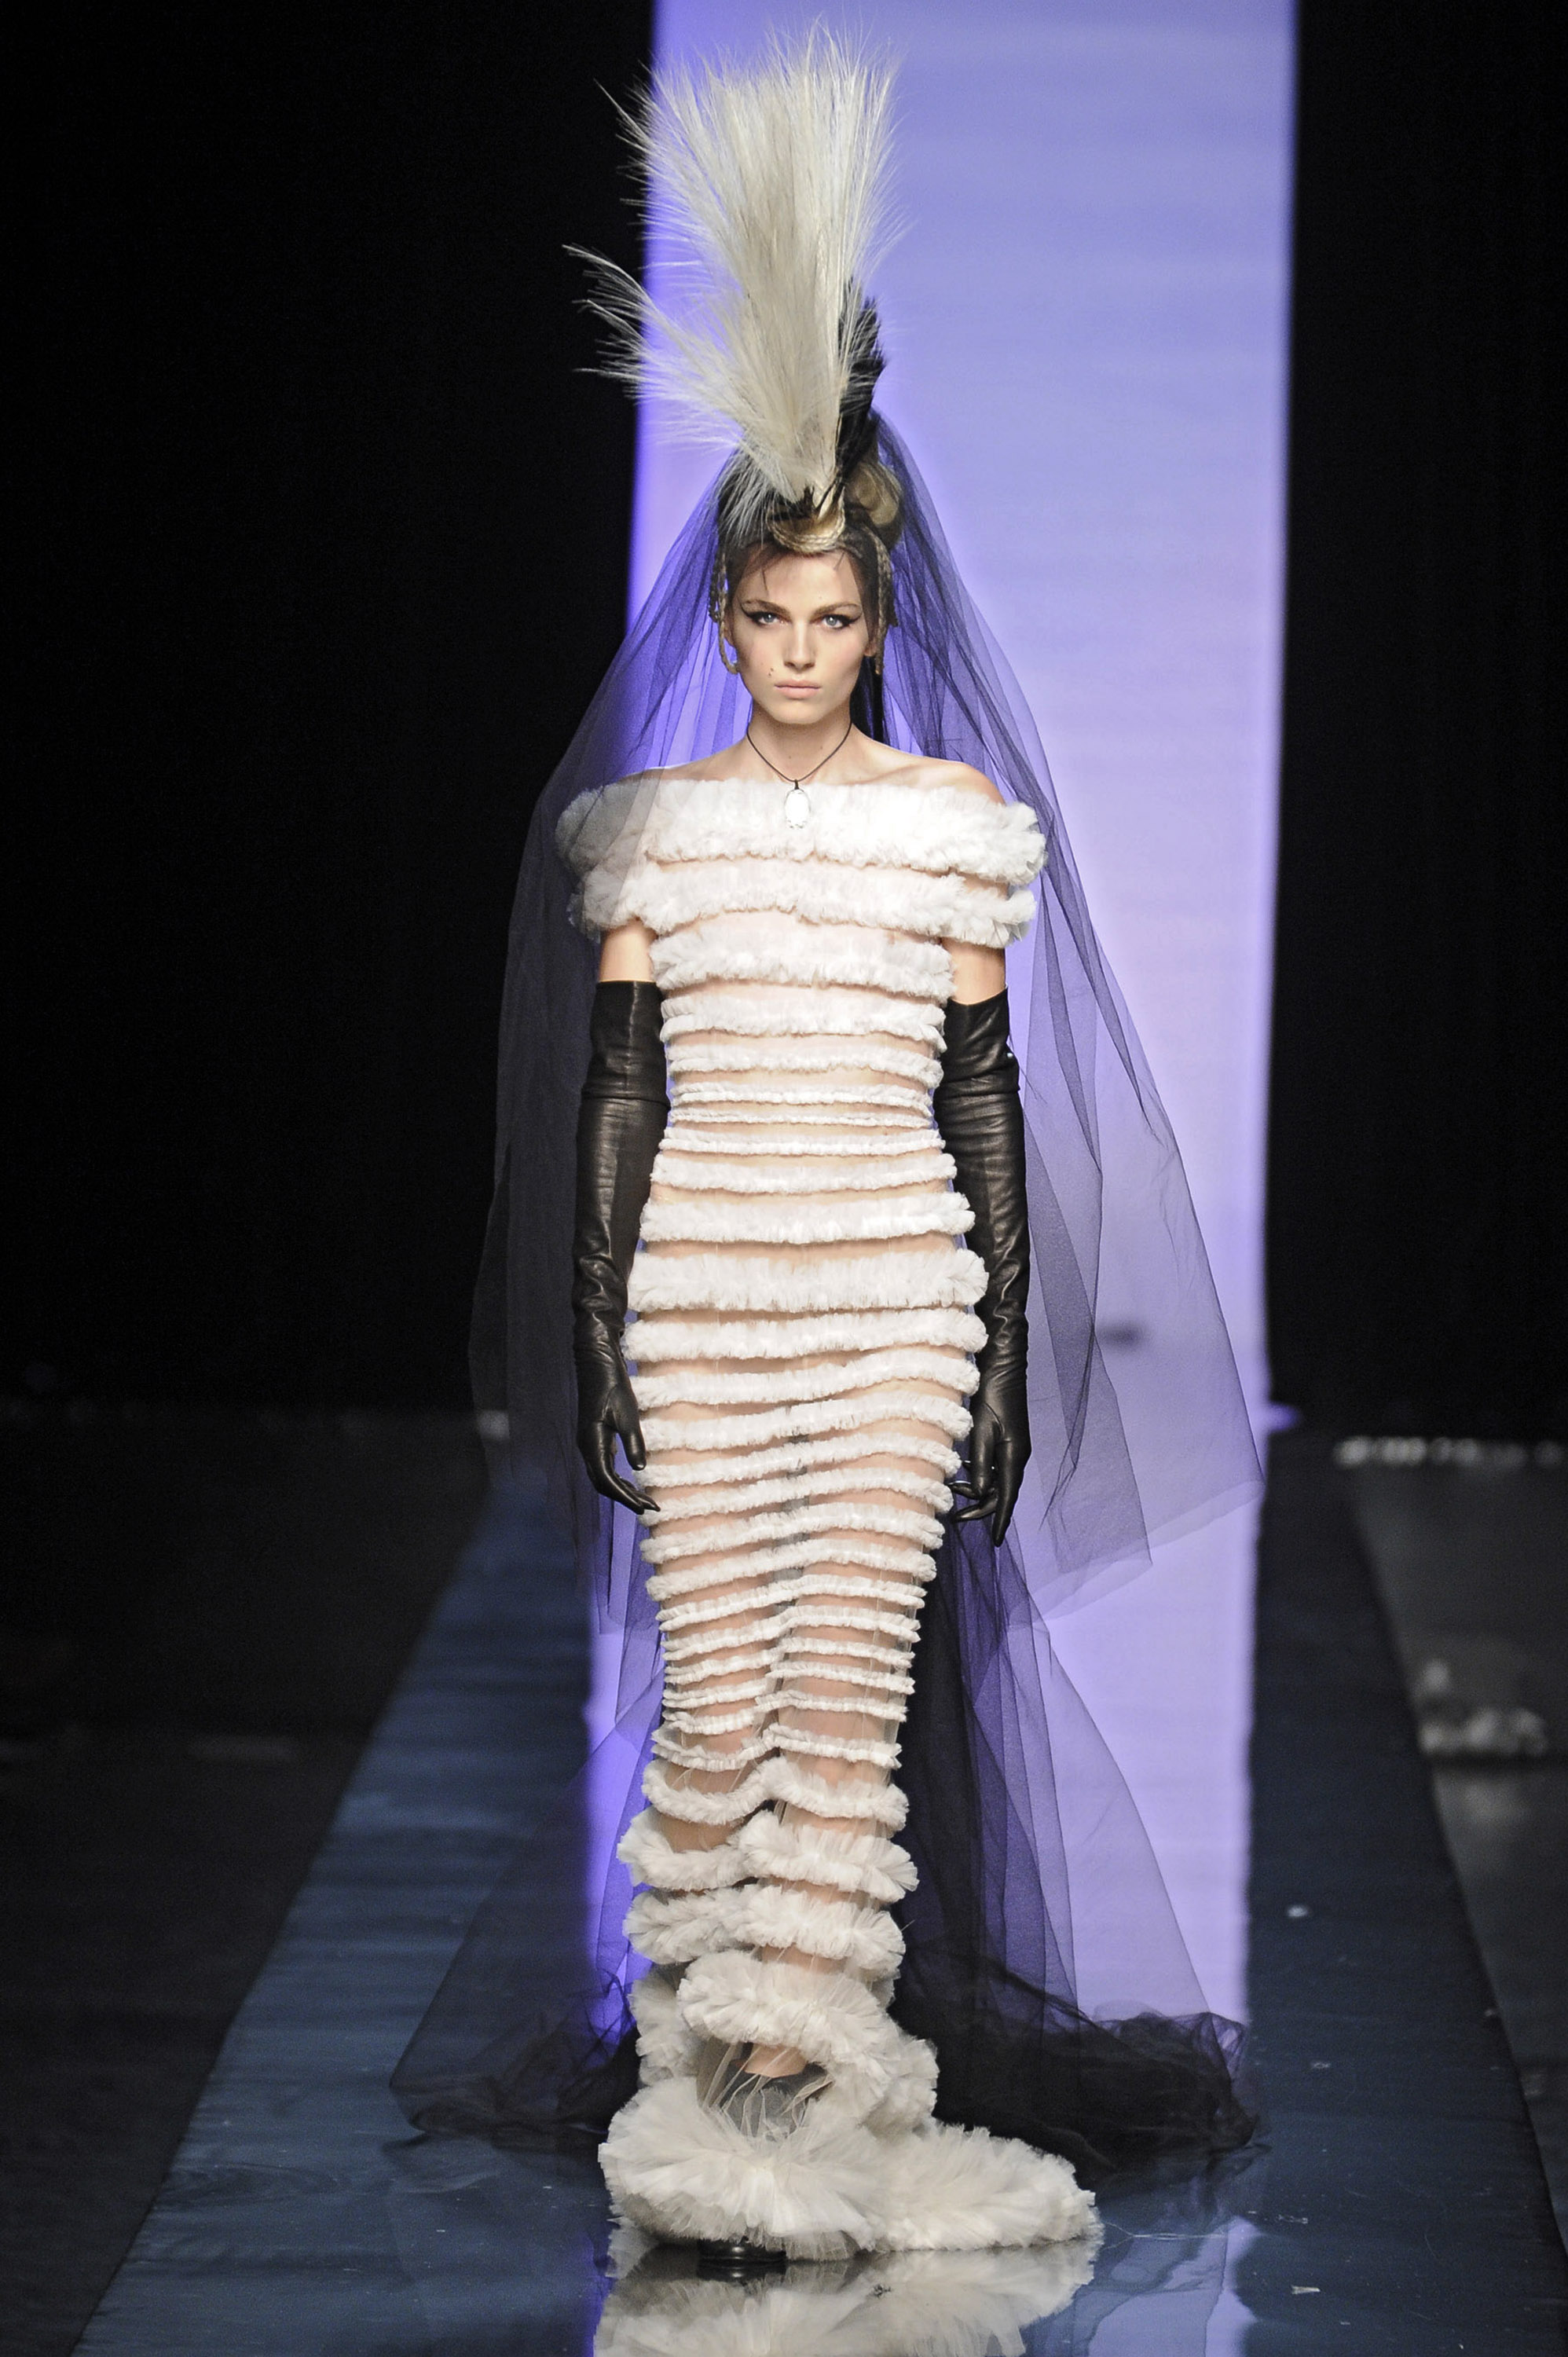 Andrej Pejic walks the runway at the Jean Paul Gaultier fashion show during Paris Haute Couture Fashion Week on January 26, 2011 in Paris, France. (Nathalie Lagneau—Catwalking/Getty Images)